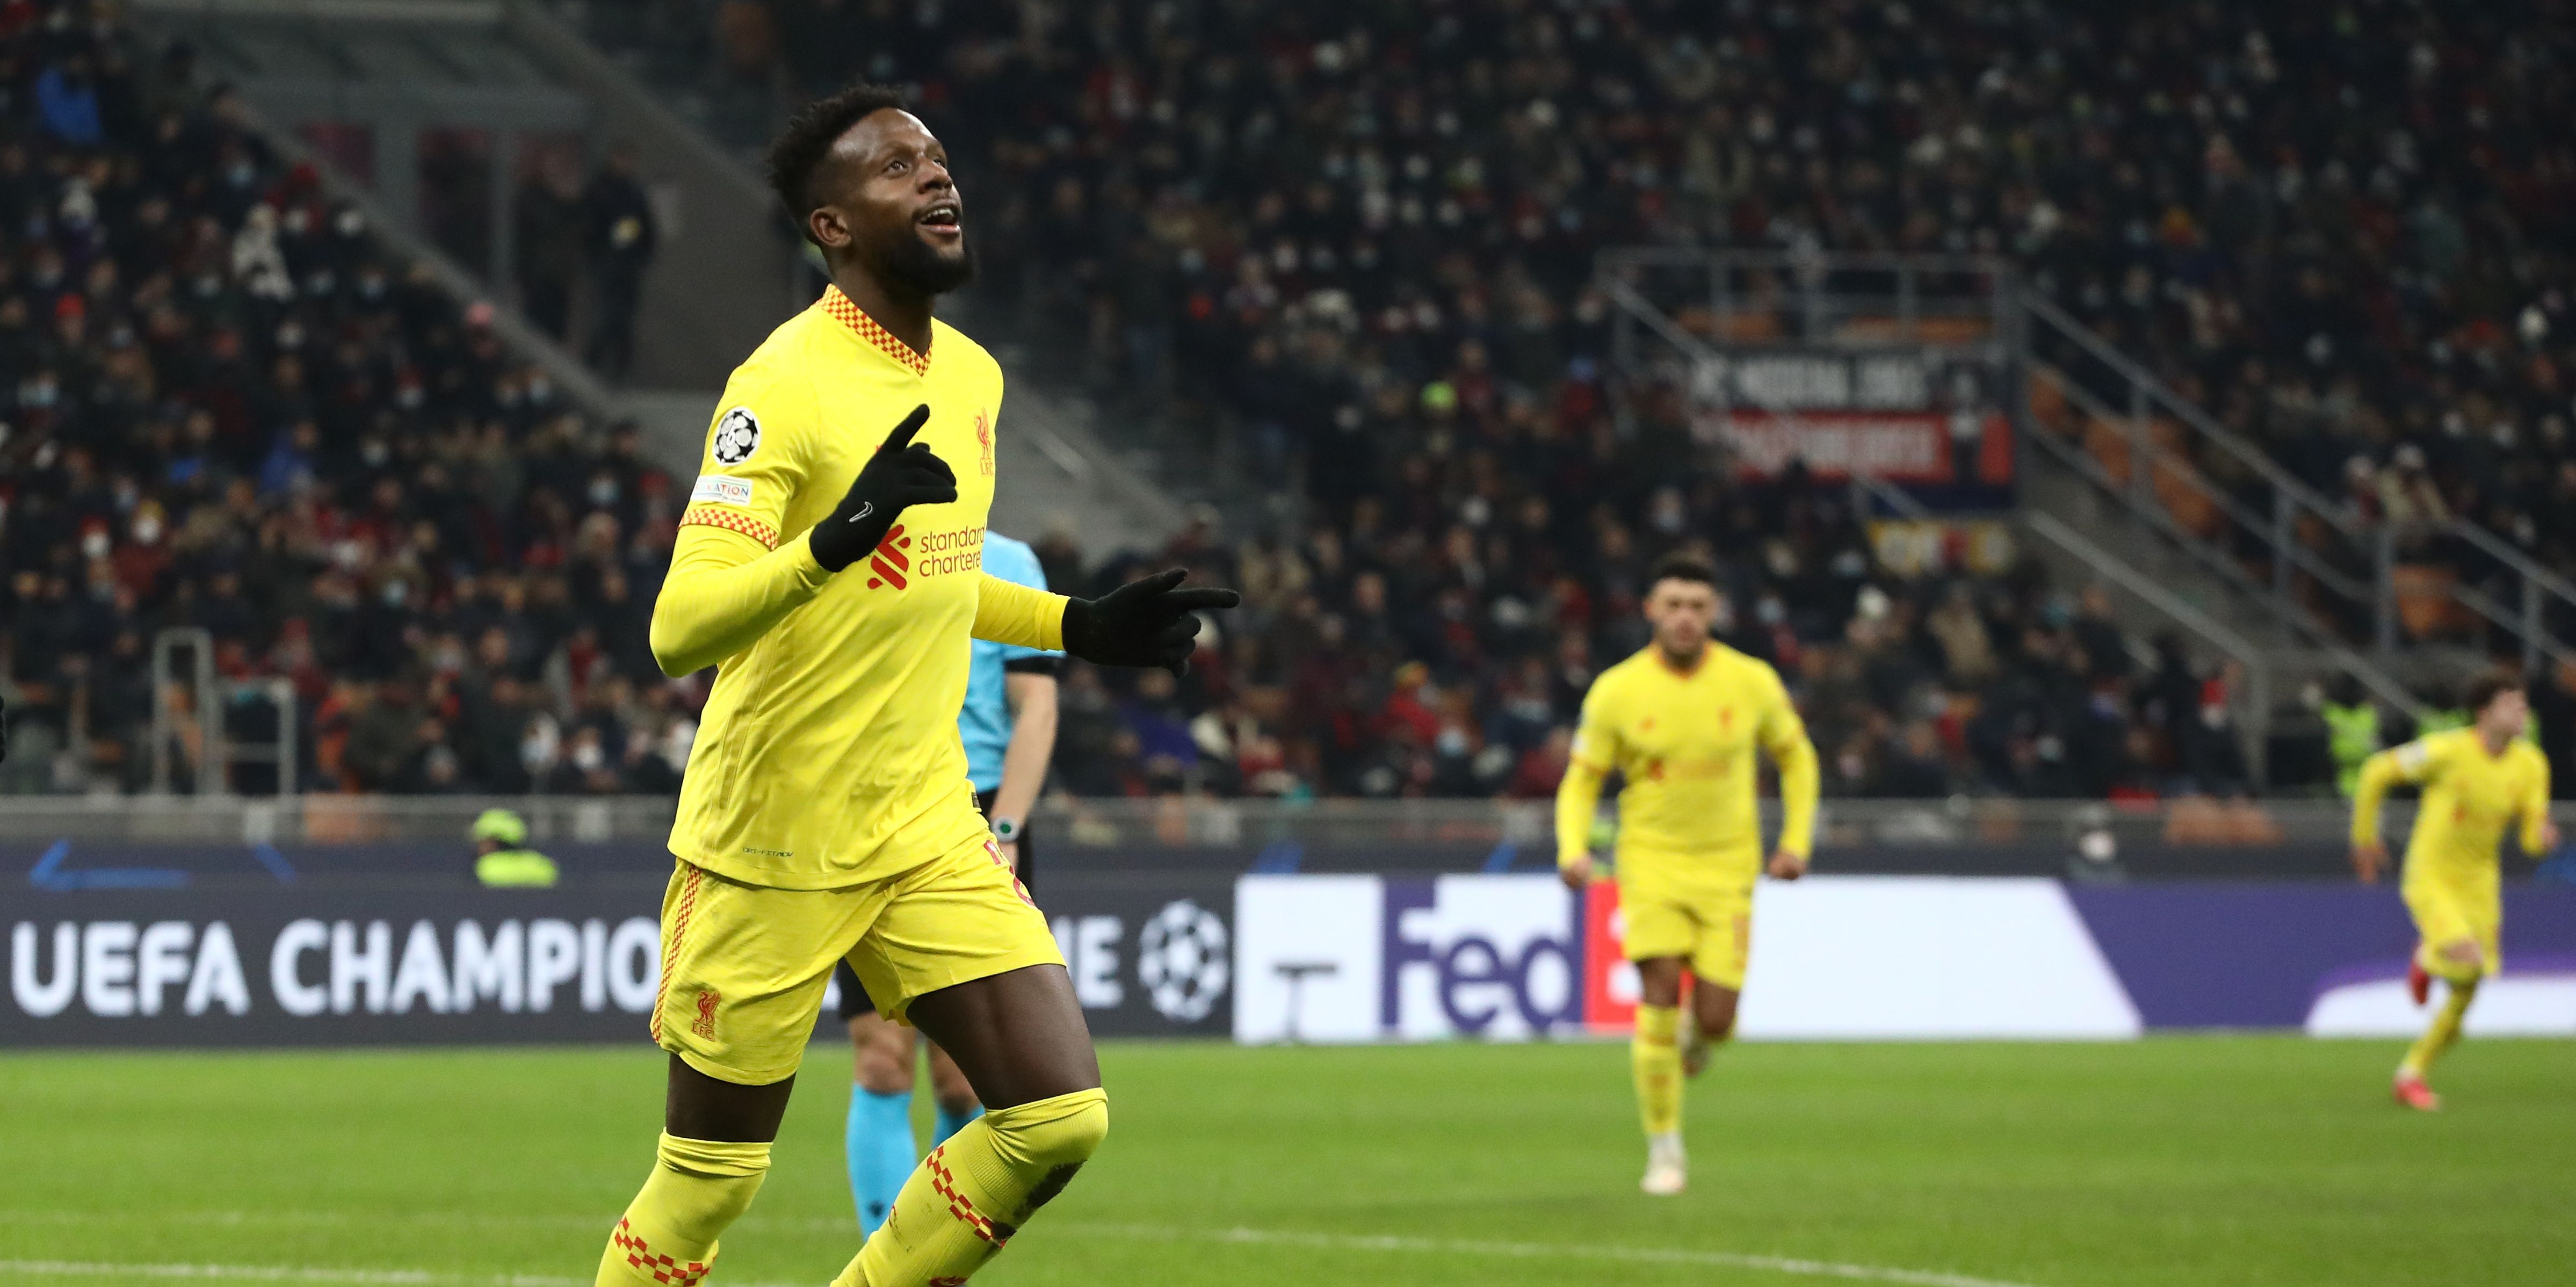 (Video) Value Liverpool would be looking for in Divock Origi PL transfer shared by Sky Sports’ Dharmesh Sheth